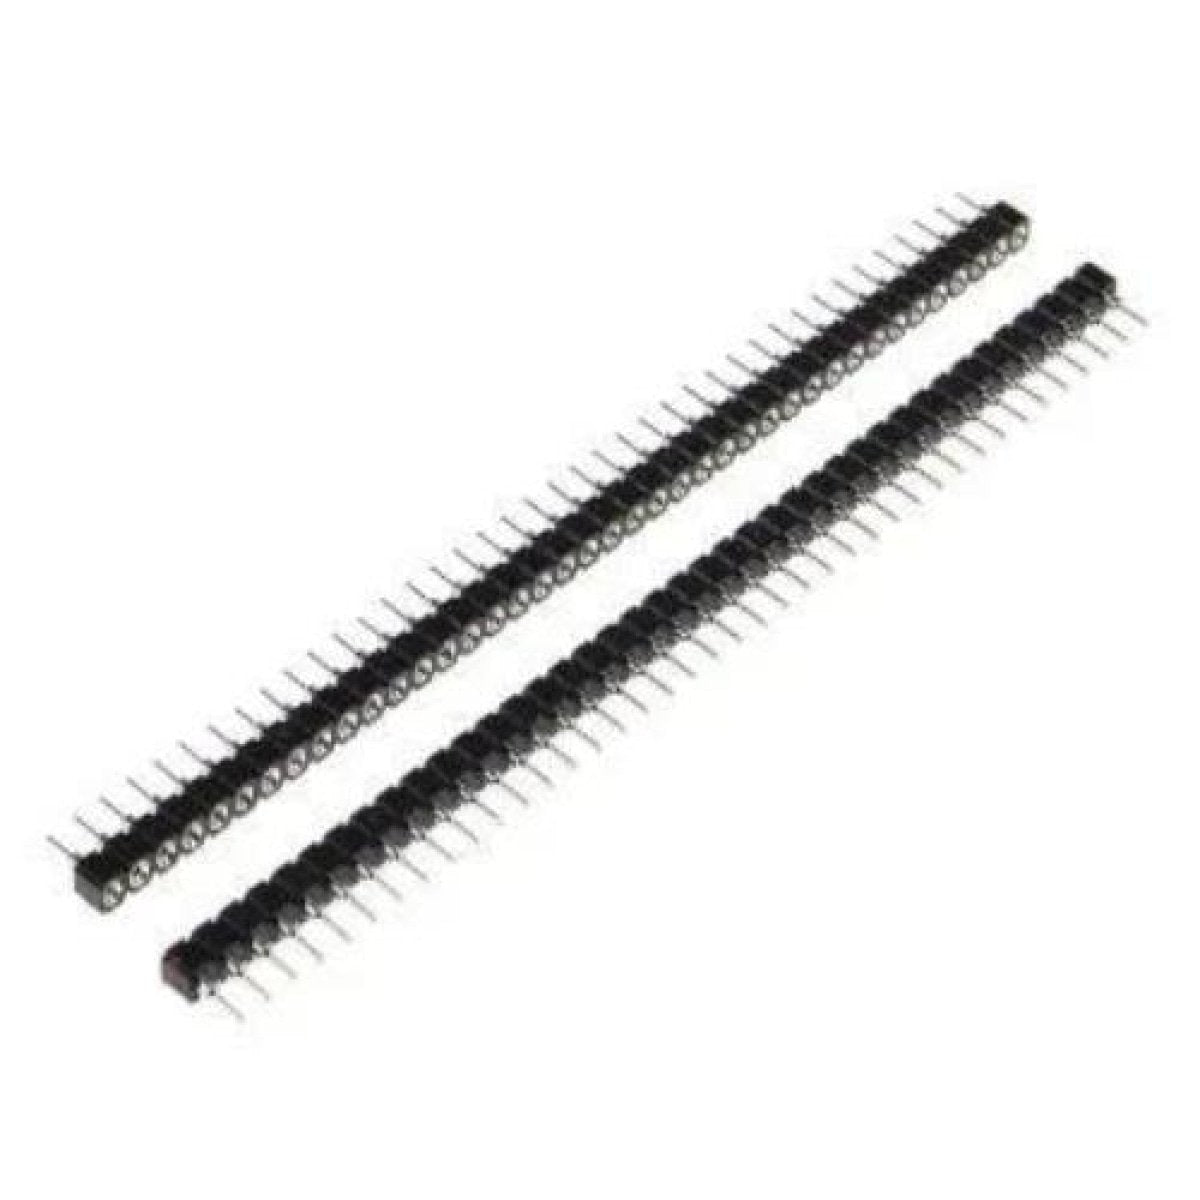 2pcs 40 Pin 1x40 Single Row Female Male 2.54mm Pitch Header Straight Right Angle Adapter - 2x Female Header - - Asia Sell